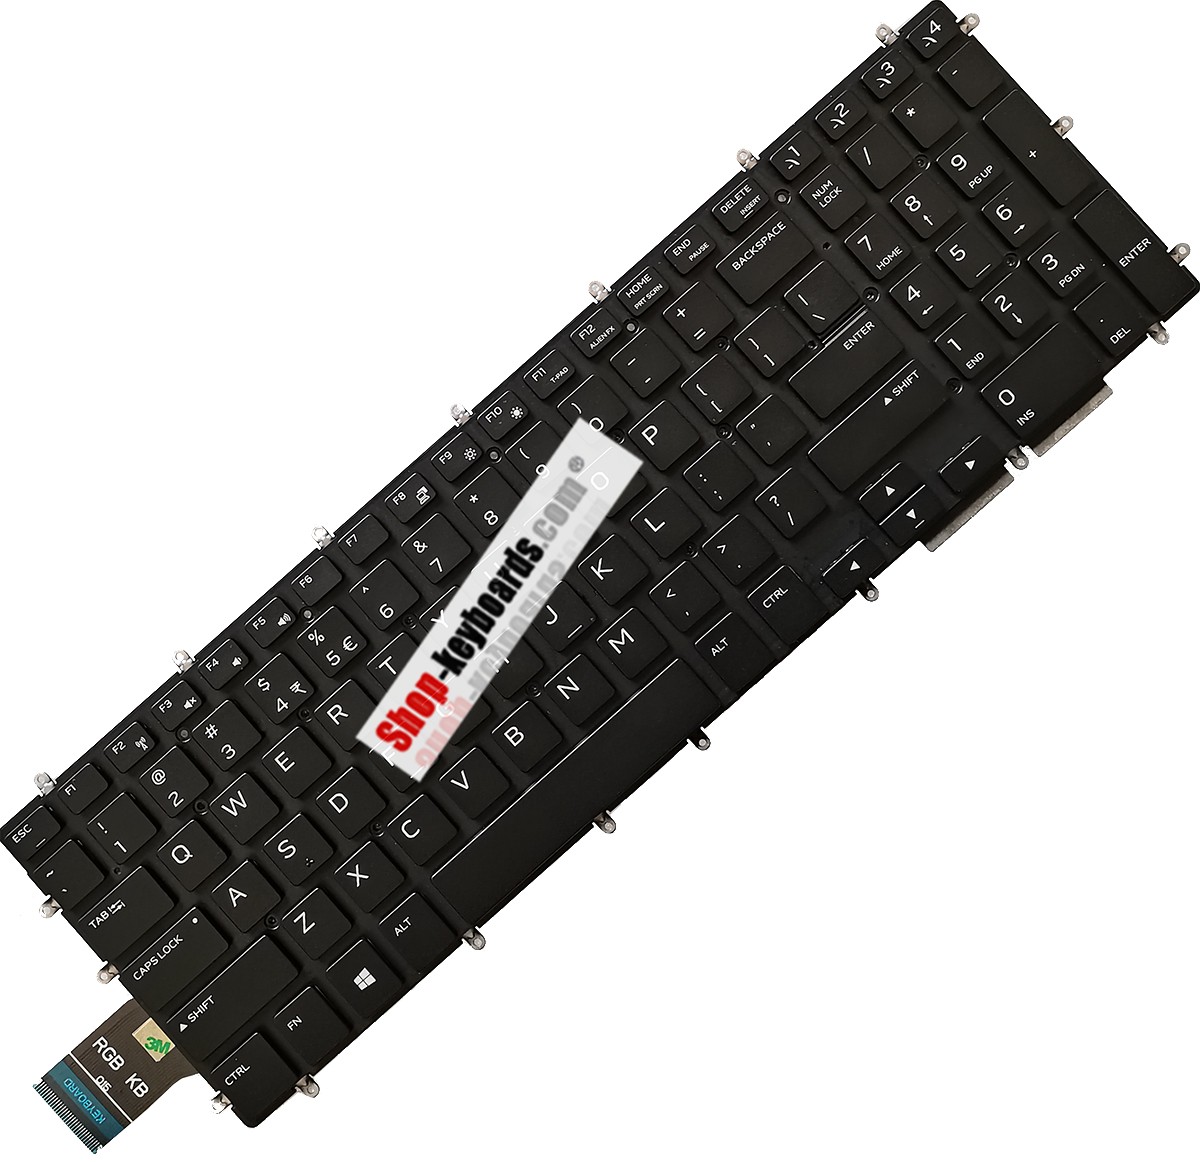 Dell AWM15-7264SLV-PUS Keyboard replacement